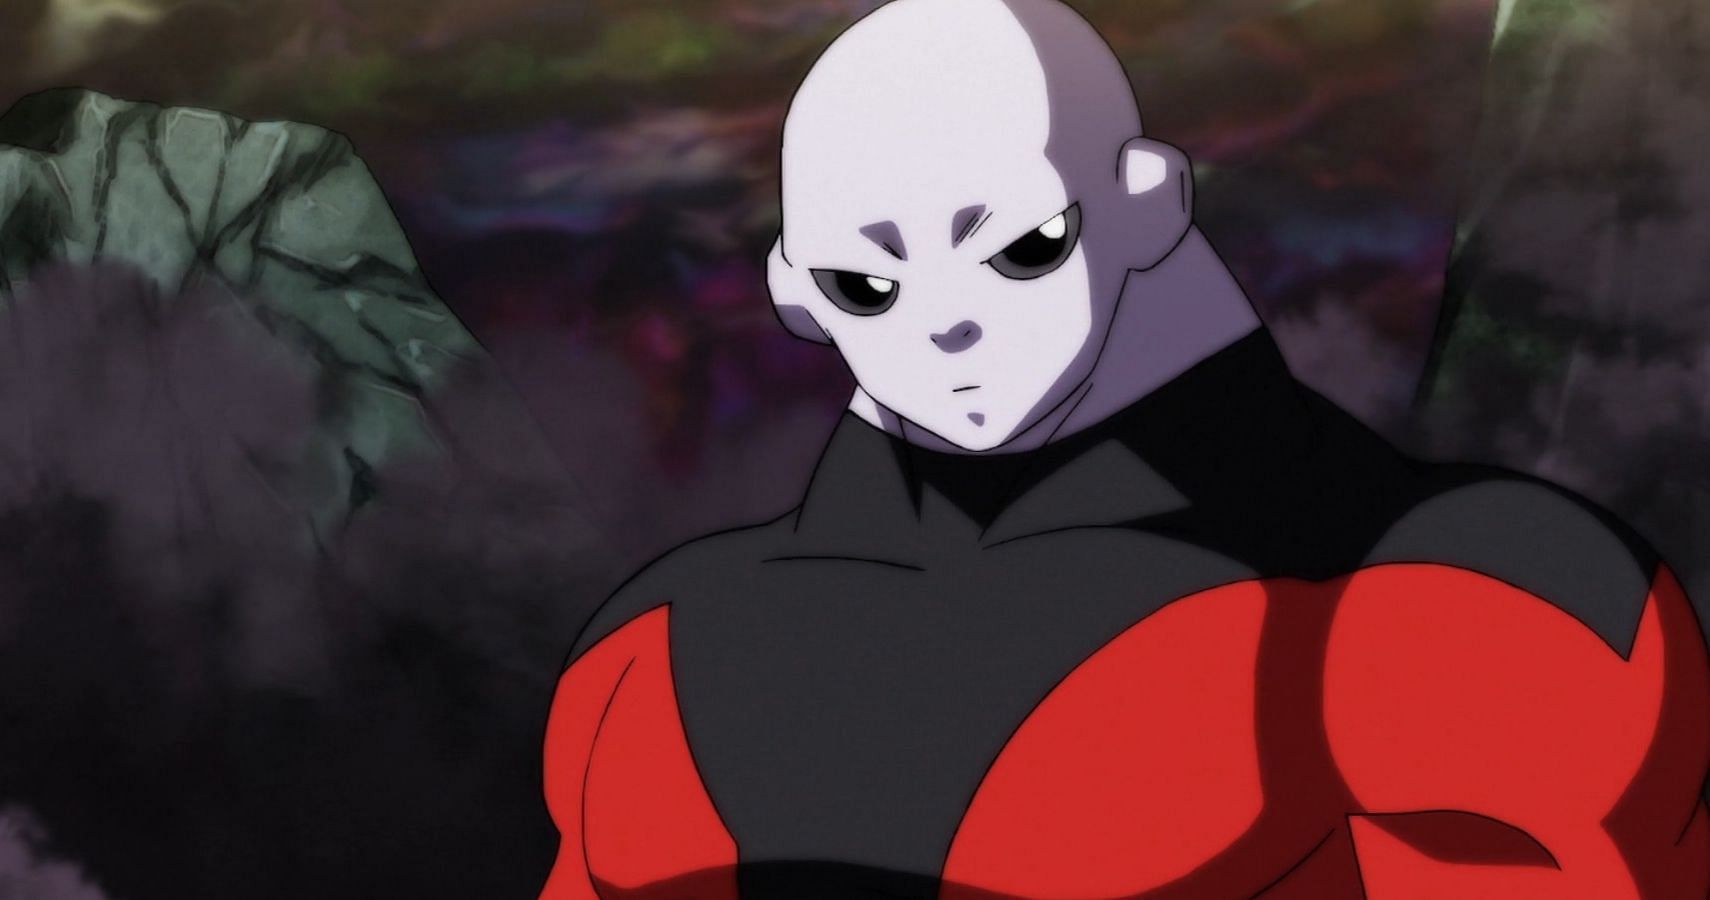 Jiren as he appears during the Tournament of Power (Image via Toei Animation)